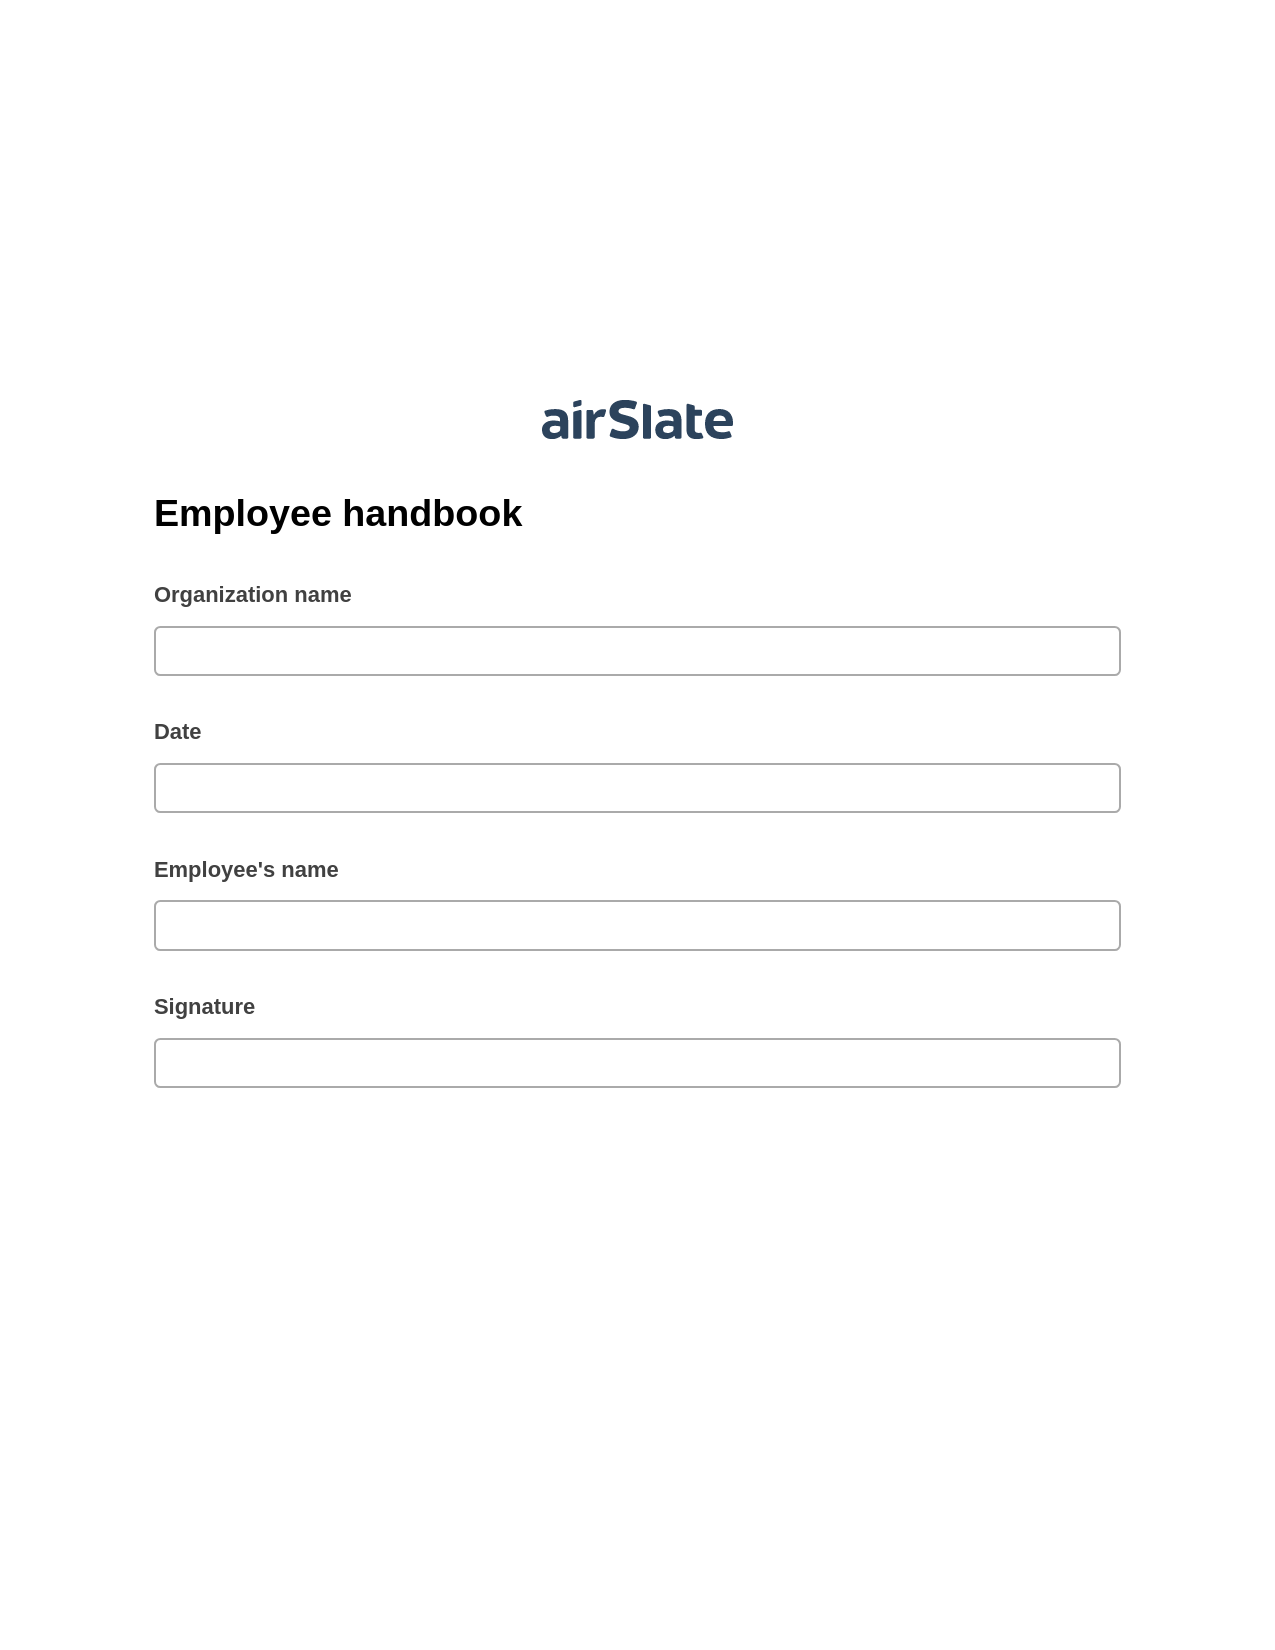 Employee handbook Pre-fill Dropdowns from Excel Bot, Send Mailchimp Campaign Bot, Export to Smartsheet